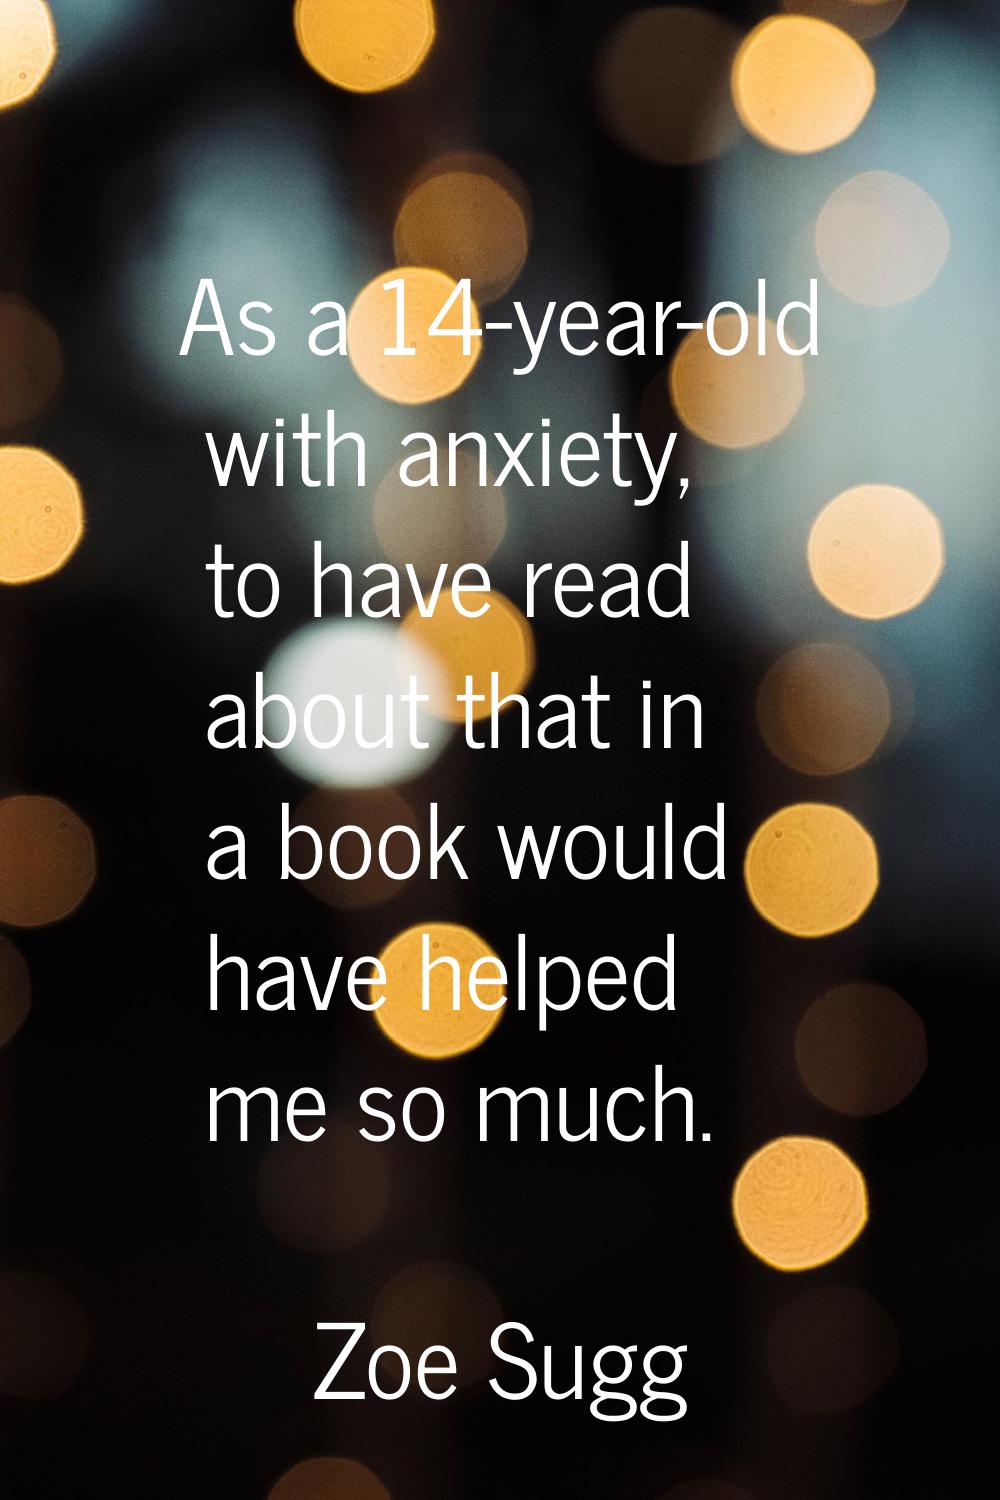 As a 14-year-old with anxiety, to have read about that in a book would have helped me so much.